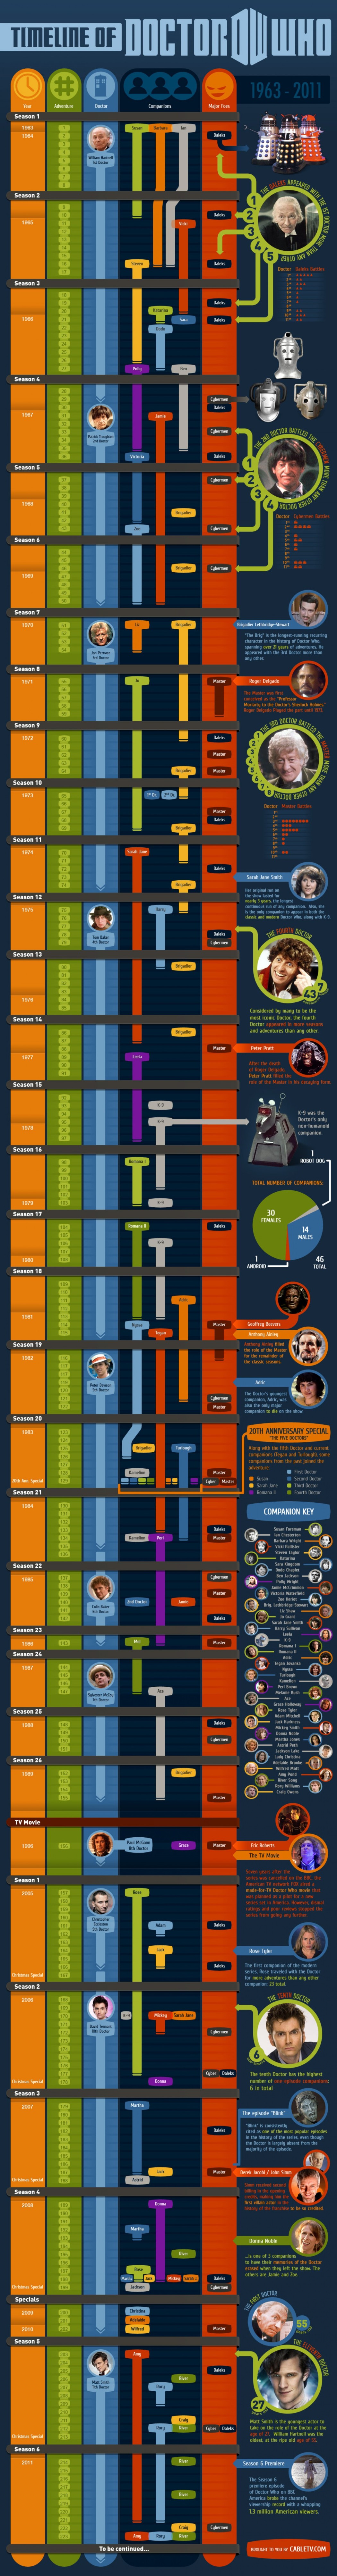 Timeline of doctor who